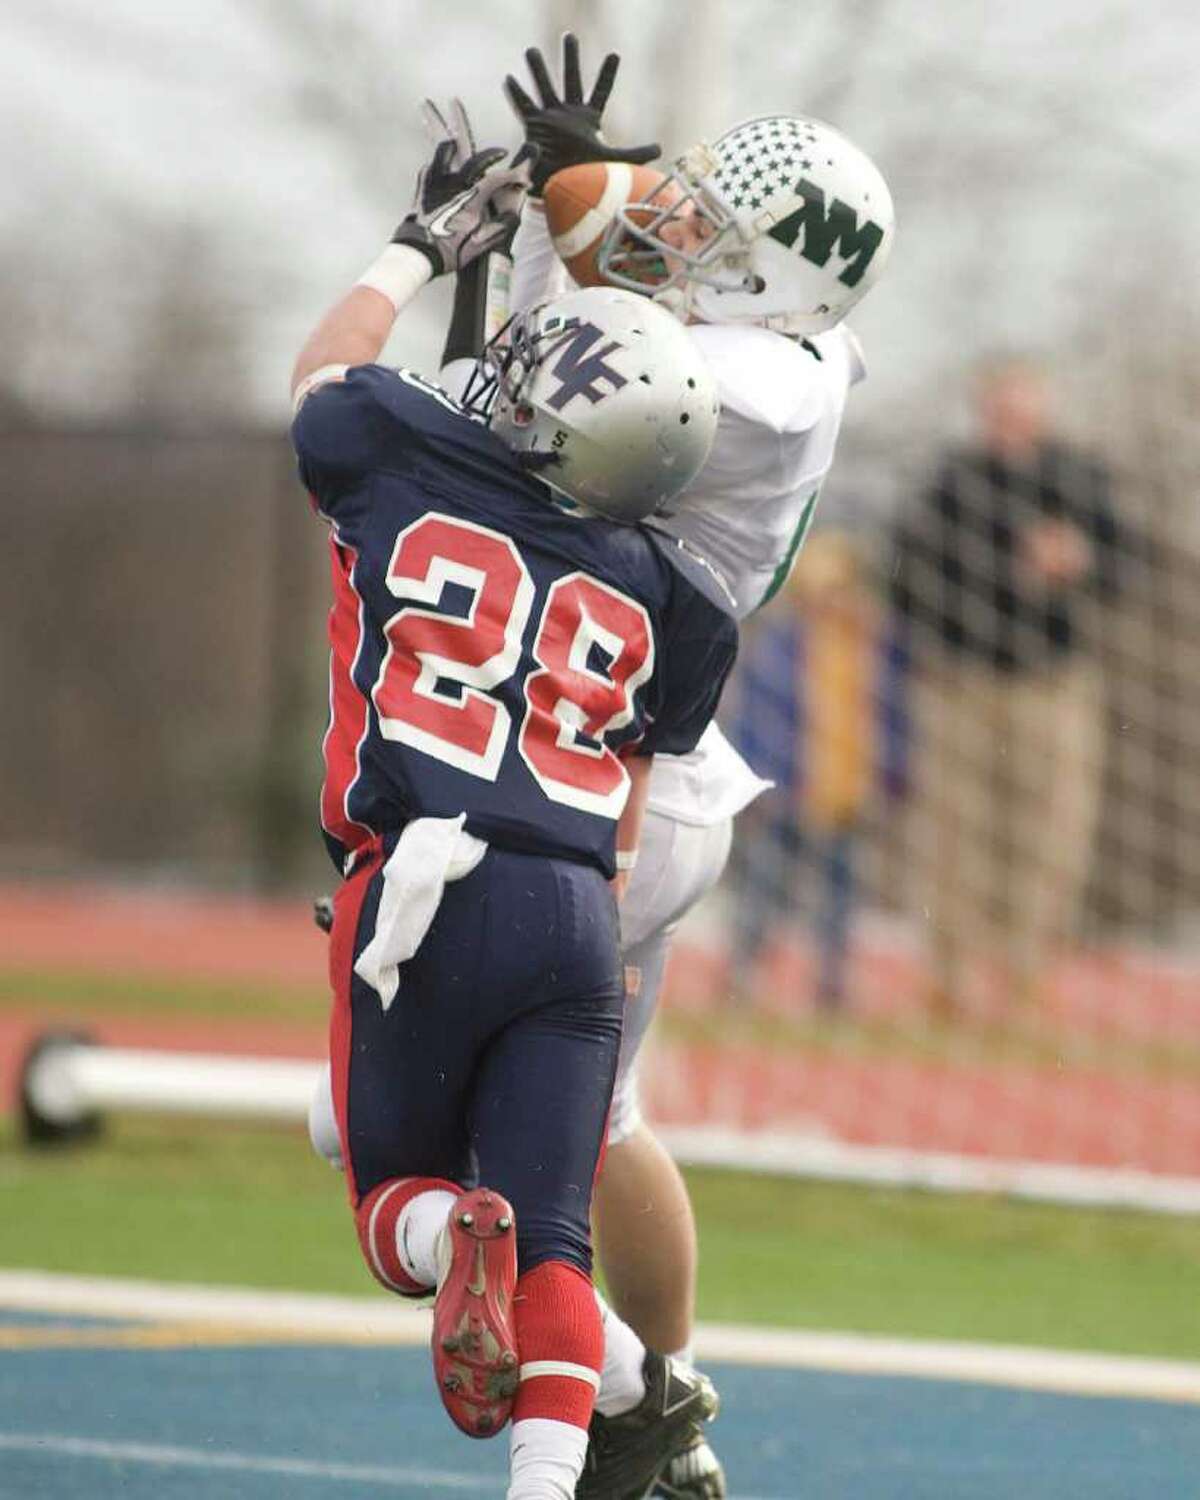 New Milford's Patrick Jordan catches a touchdown pass despite tight coverage by New Fairfield's Jimmy Andreozzi Thursday, Nov. 25, 2010 at New Fairfield High School.